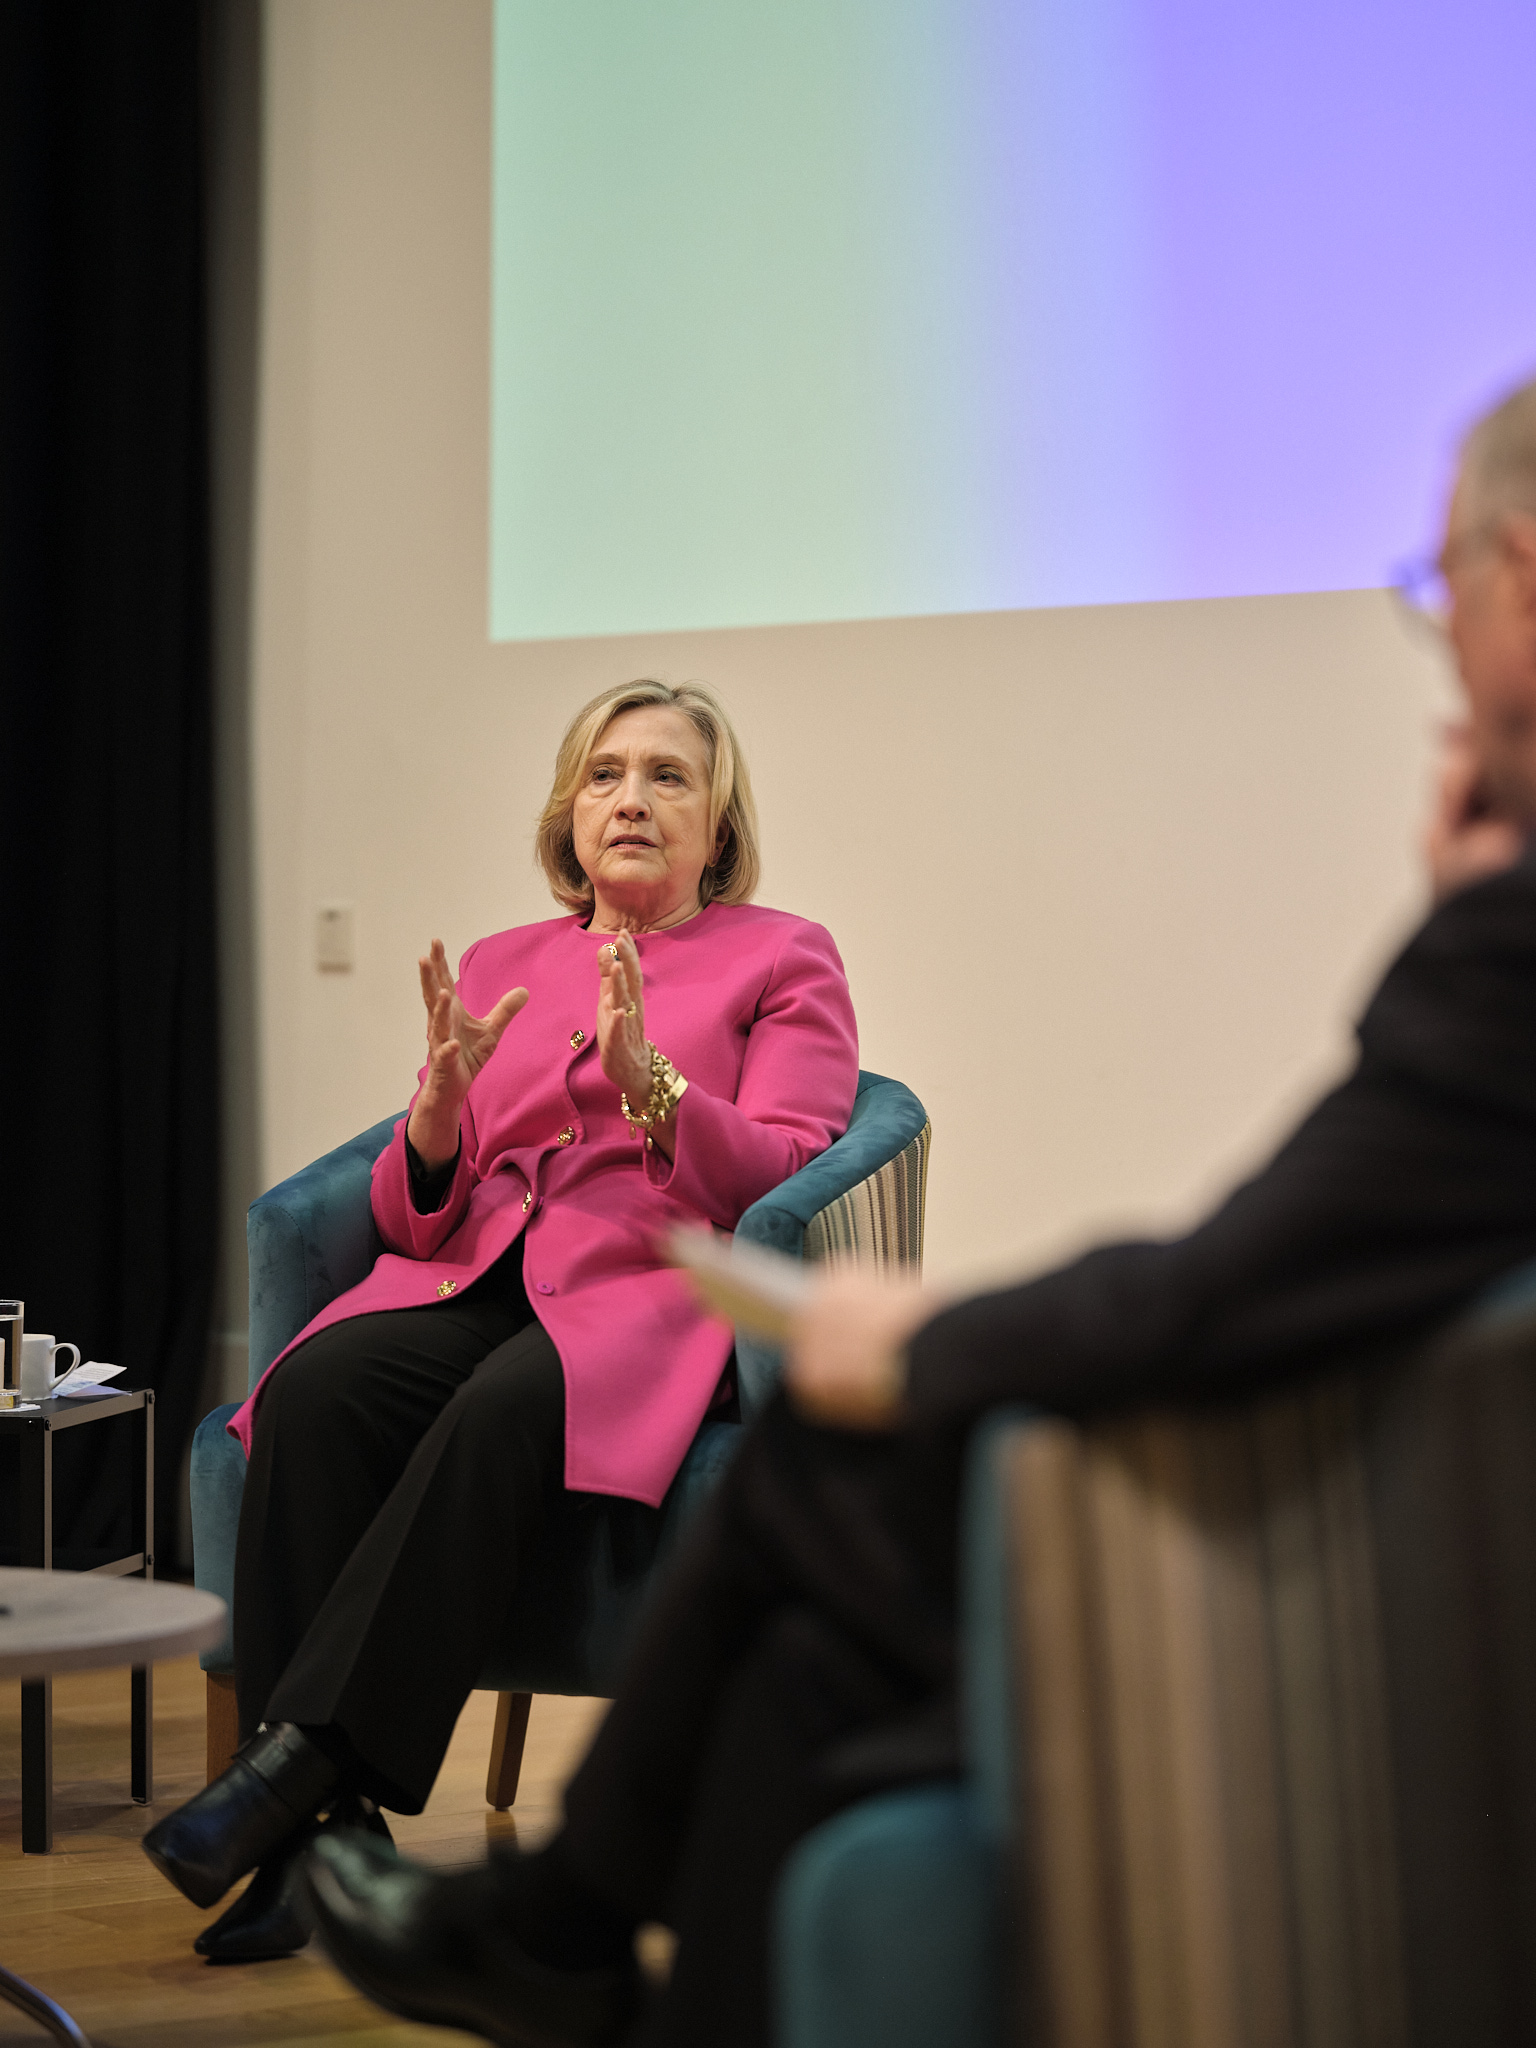 A close-up of Secretary Hillary Rodham Clinton, who is speaking and gesturing with her hands.